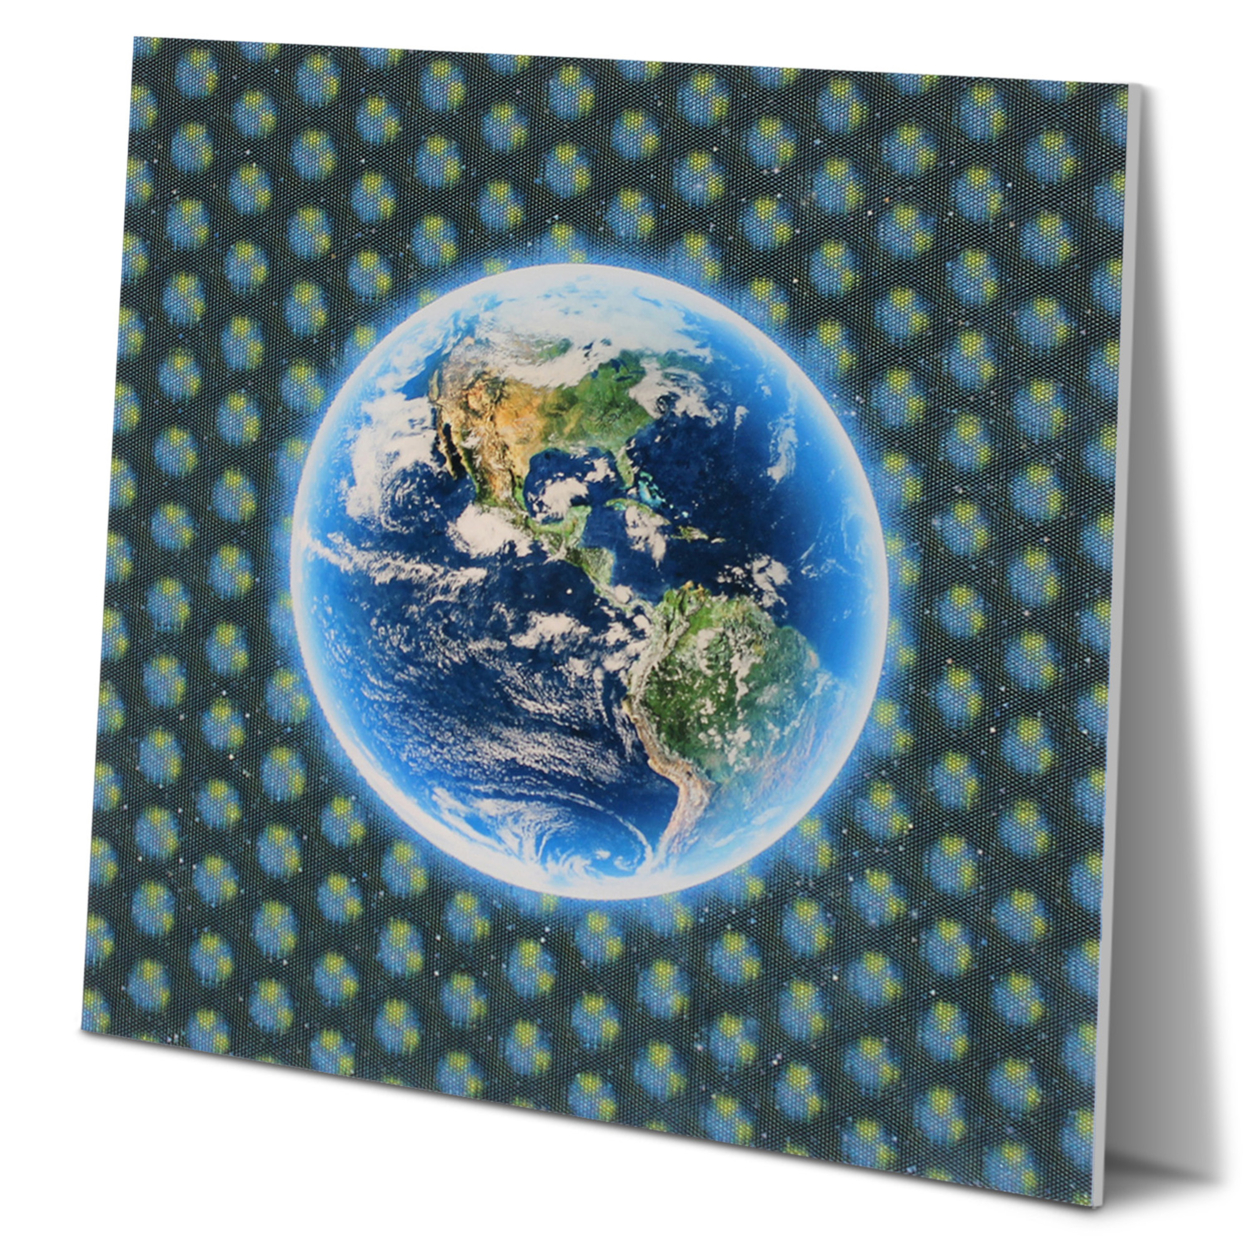 5D Multi-Dimensional Wall Art - Custom Made 5D Earth Wall Art Print On Strong Polycarbonate Panel W/ Vibrant Colors By Matashi